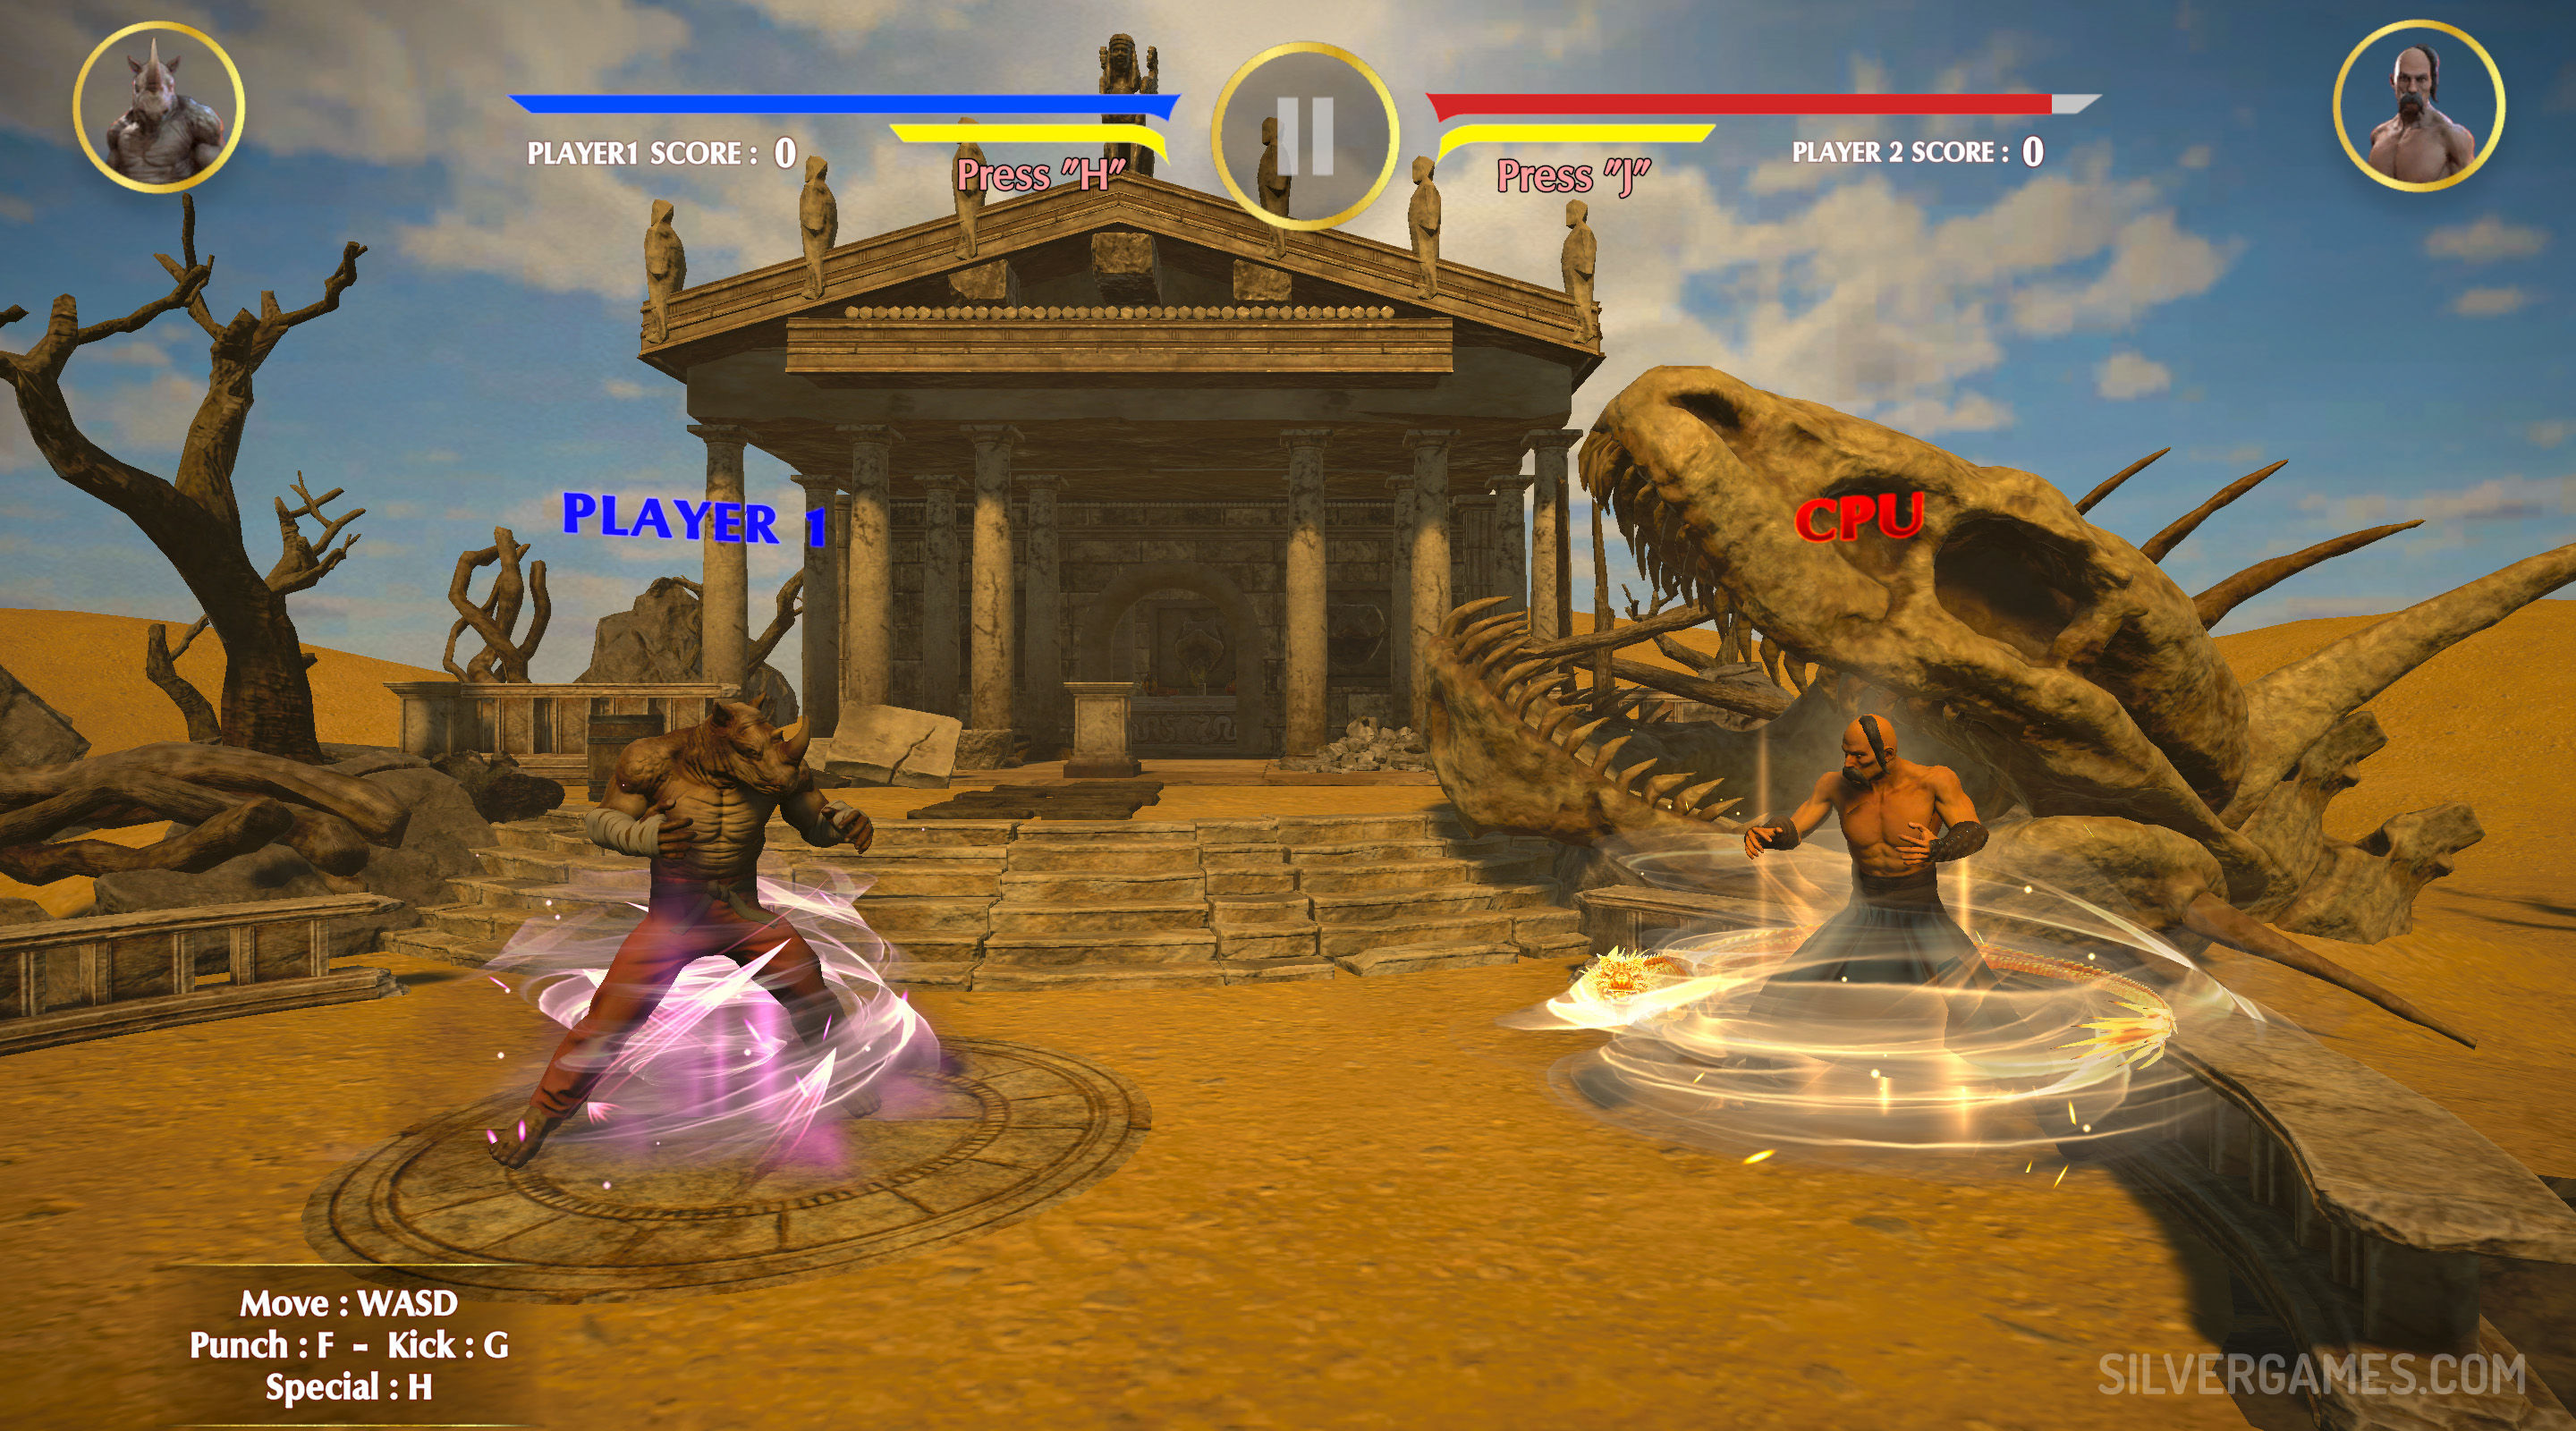 Fighter Legends Duo - Play Fighter Legends Duo online at Friv 2023